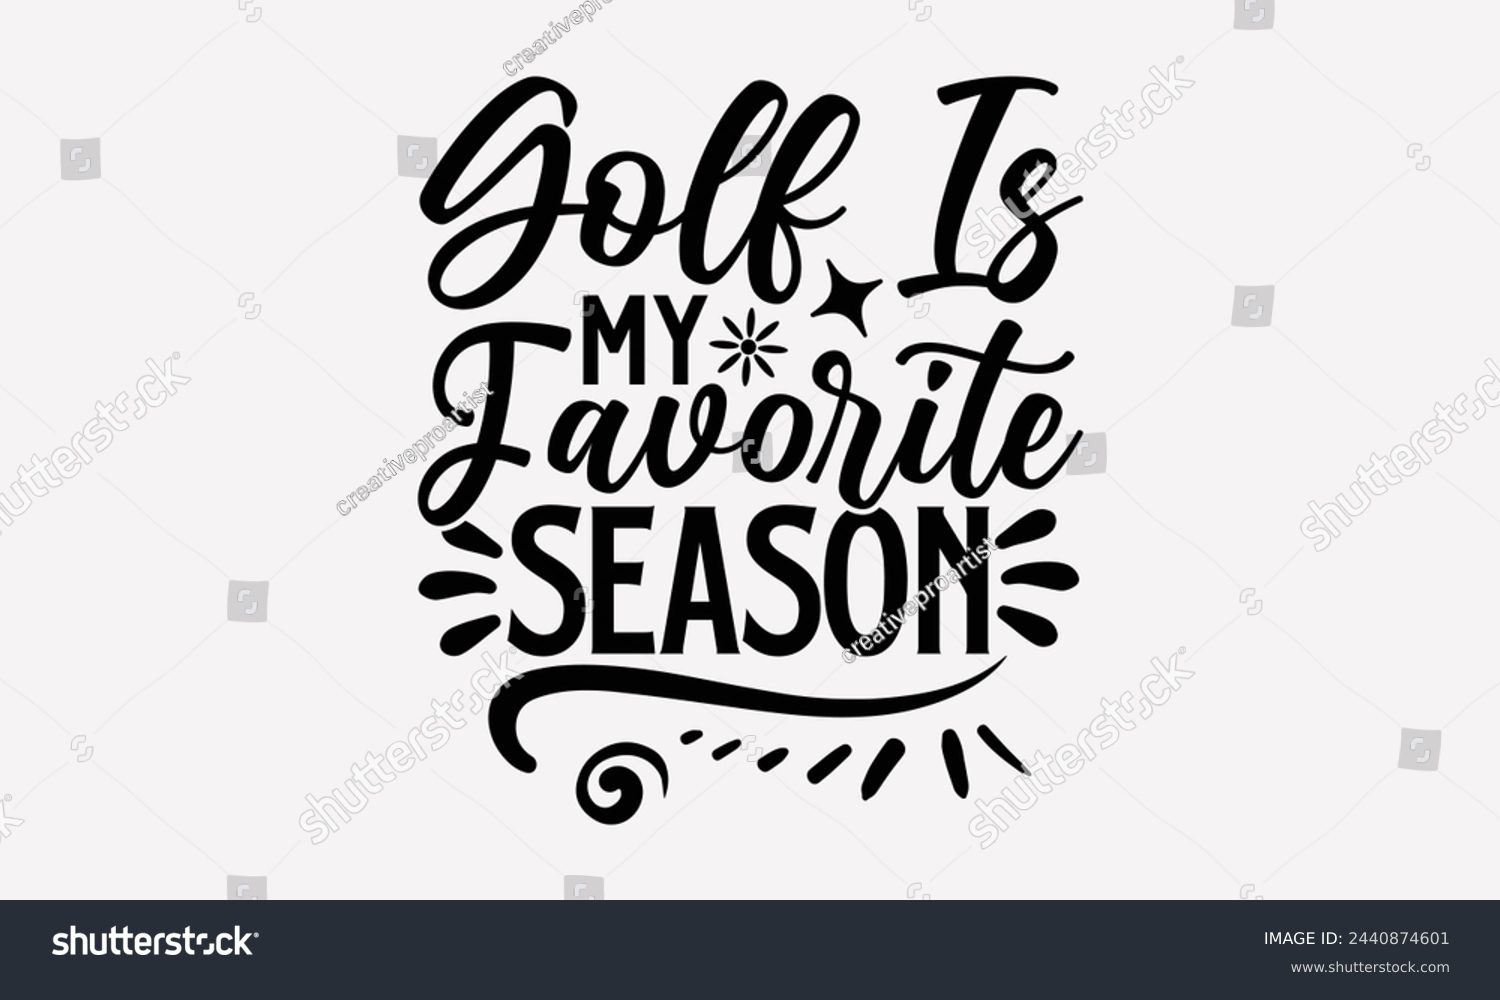 SVG of Golf Is My Favorite Season- Golf t- shirt design, Hand drawn lettering phrase isolated on white background, for Cutting Machine, Silhouette Cameo, Cricut, greeting card template with typography text svg